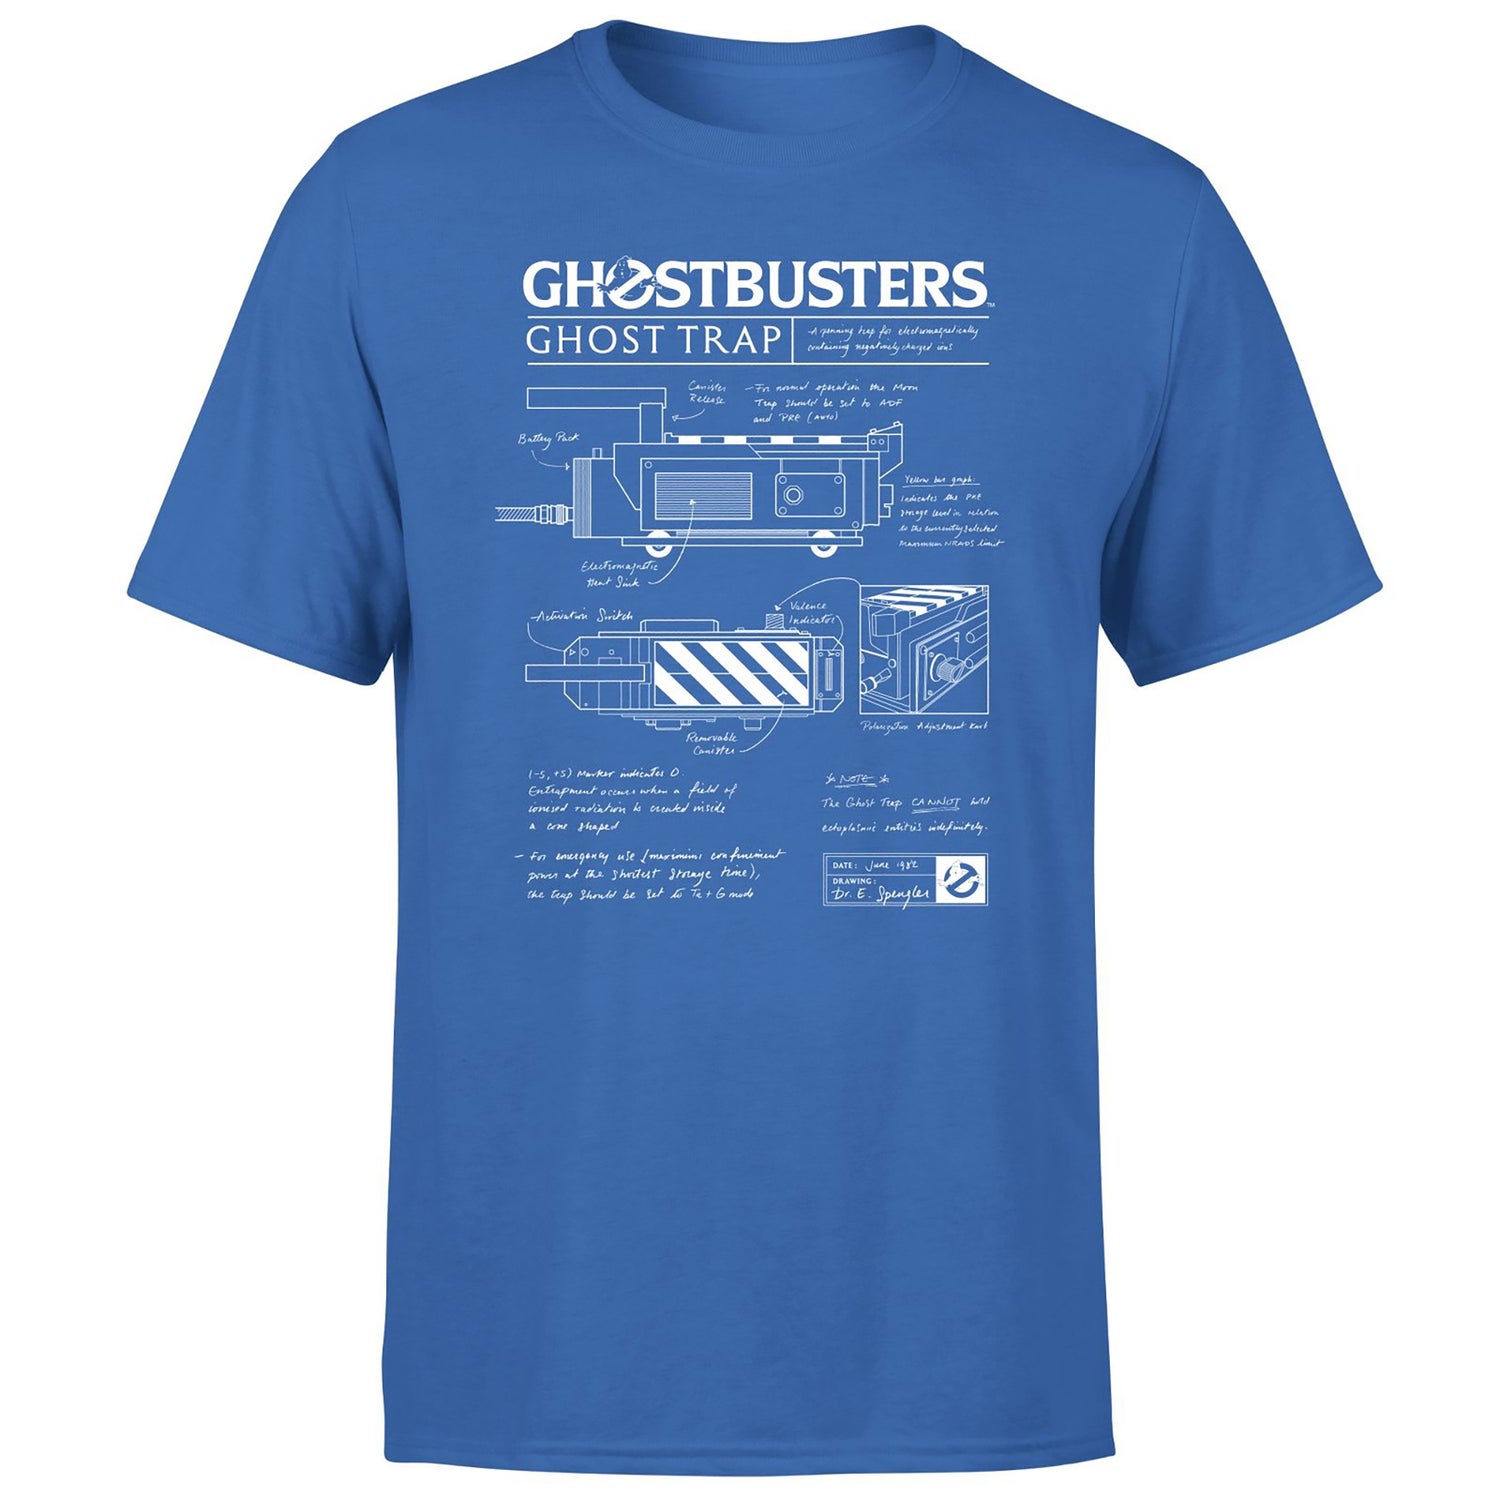 Ghostbusters Ghost Trap Schematic Men's T-Shirt - Blue